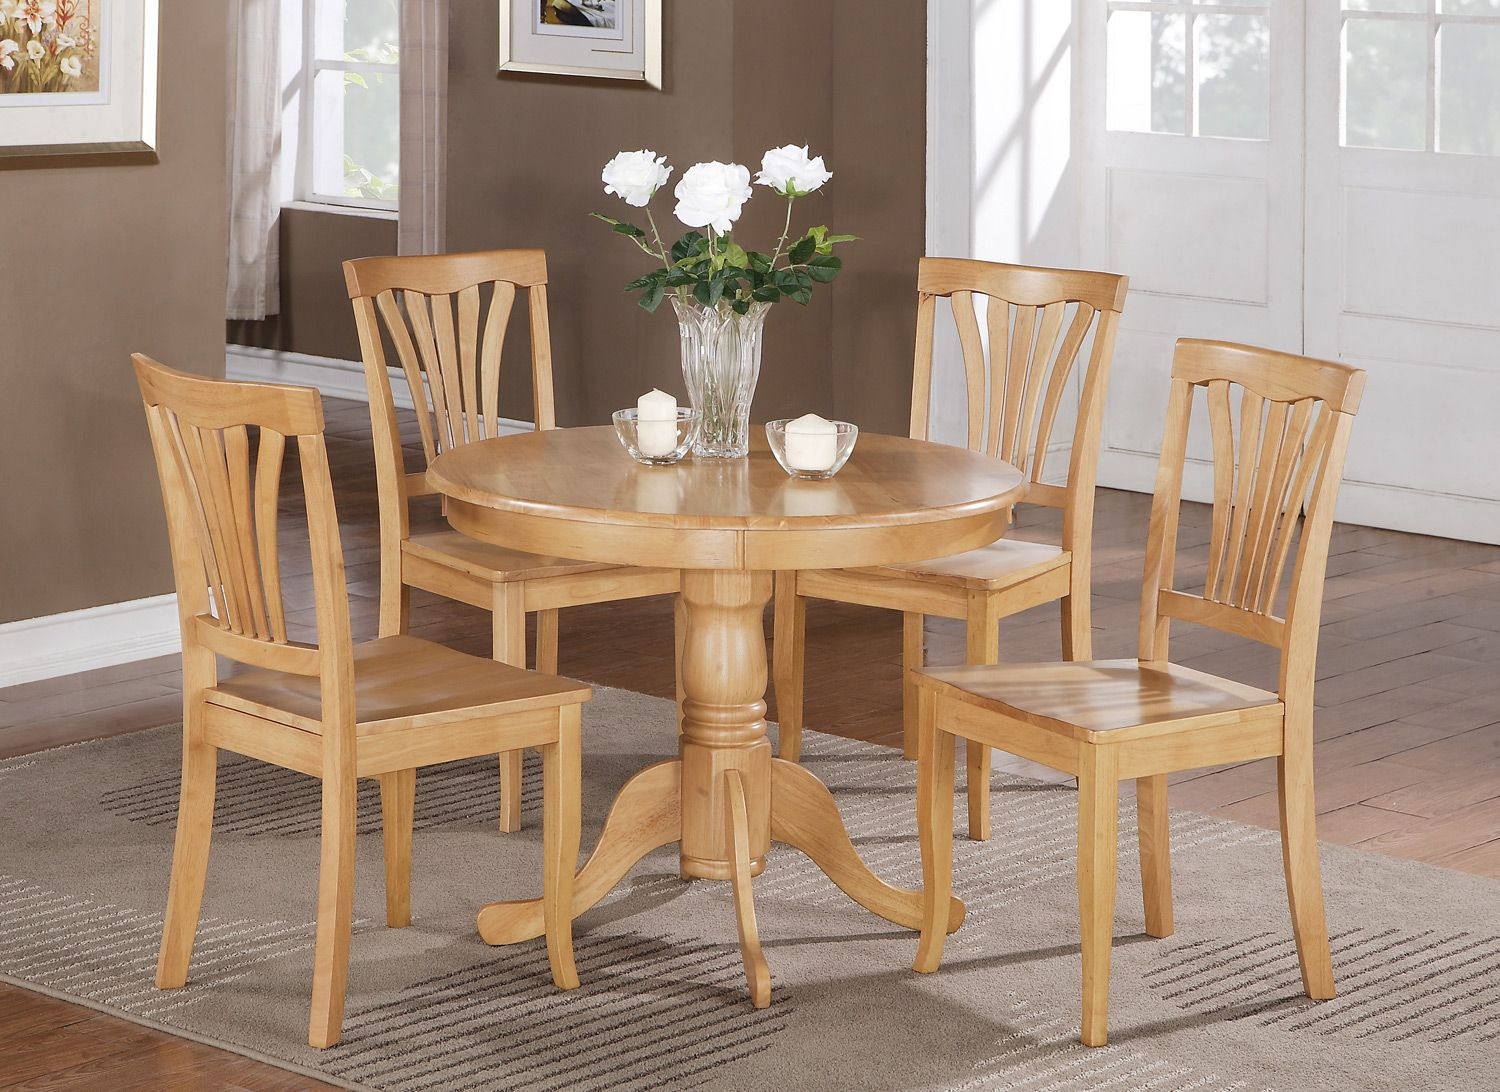 Small Round Kitchen Table Set
 5PC SMALL KITCHEN DINING SET IN OAK FINISH stores